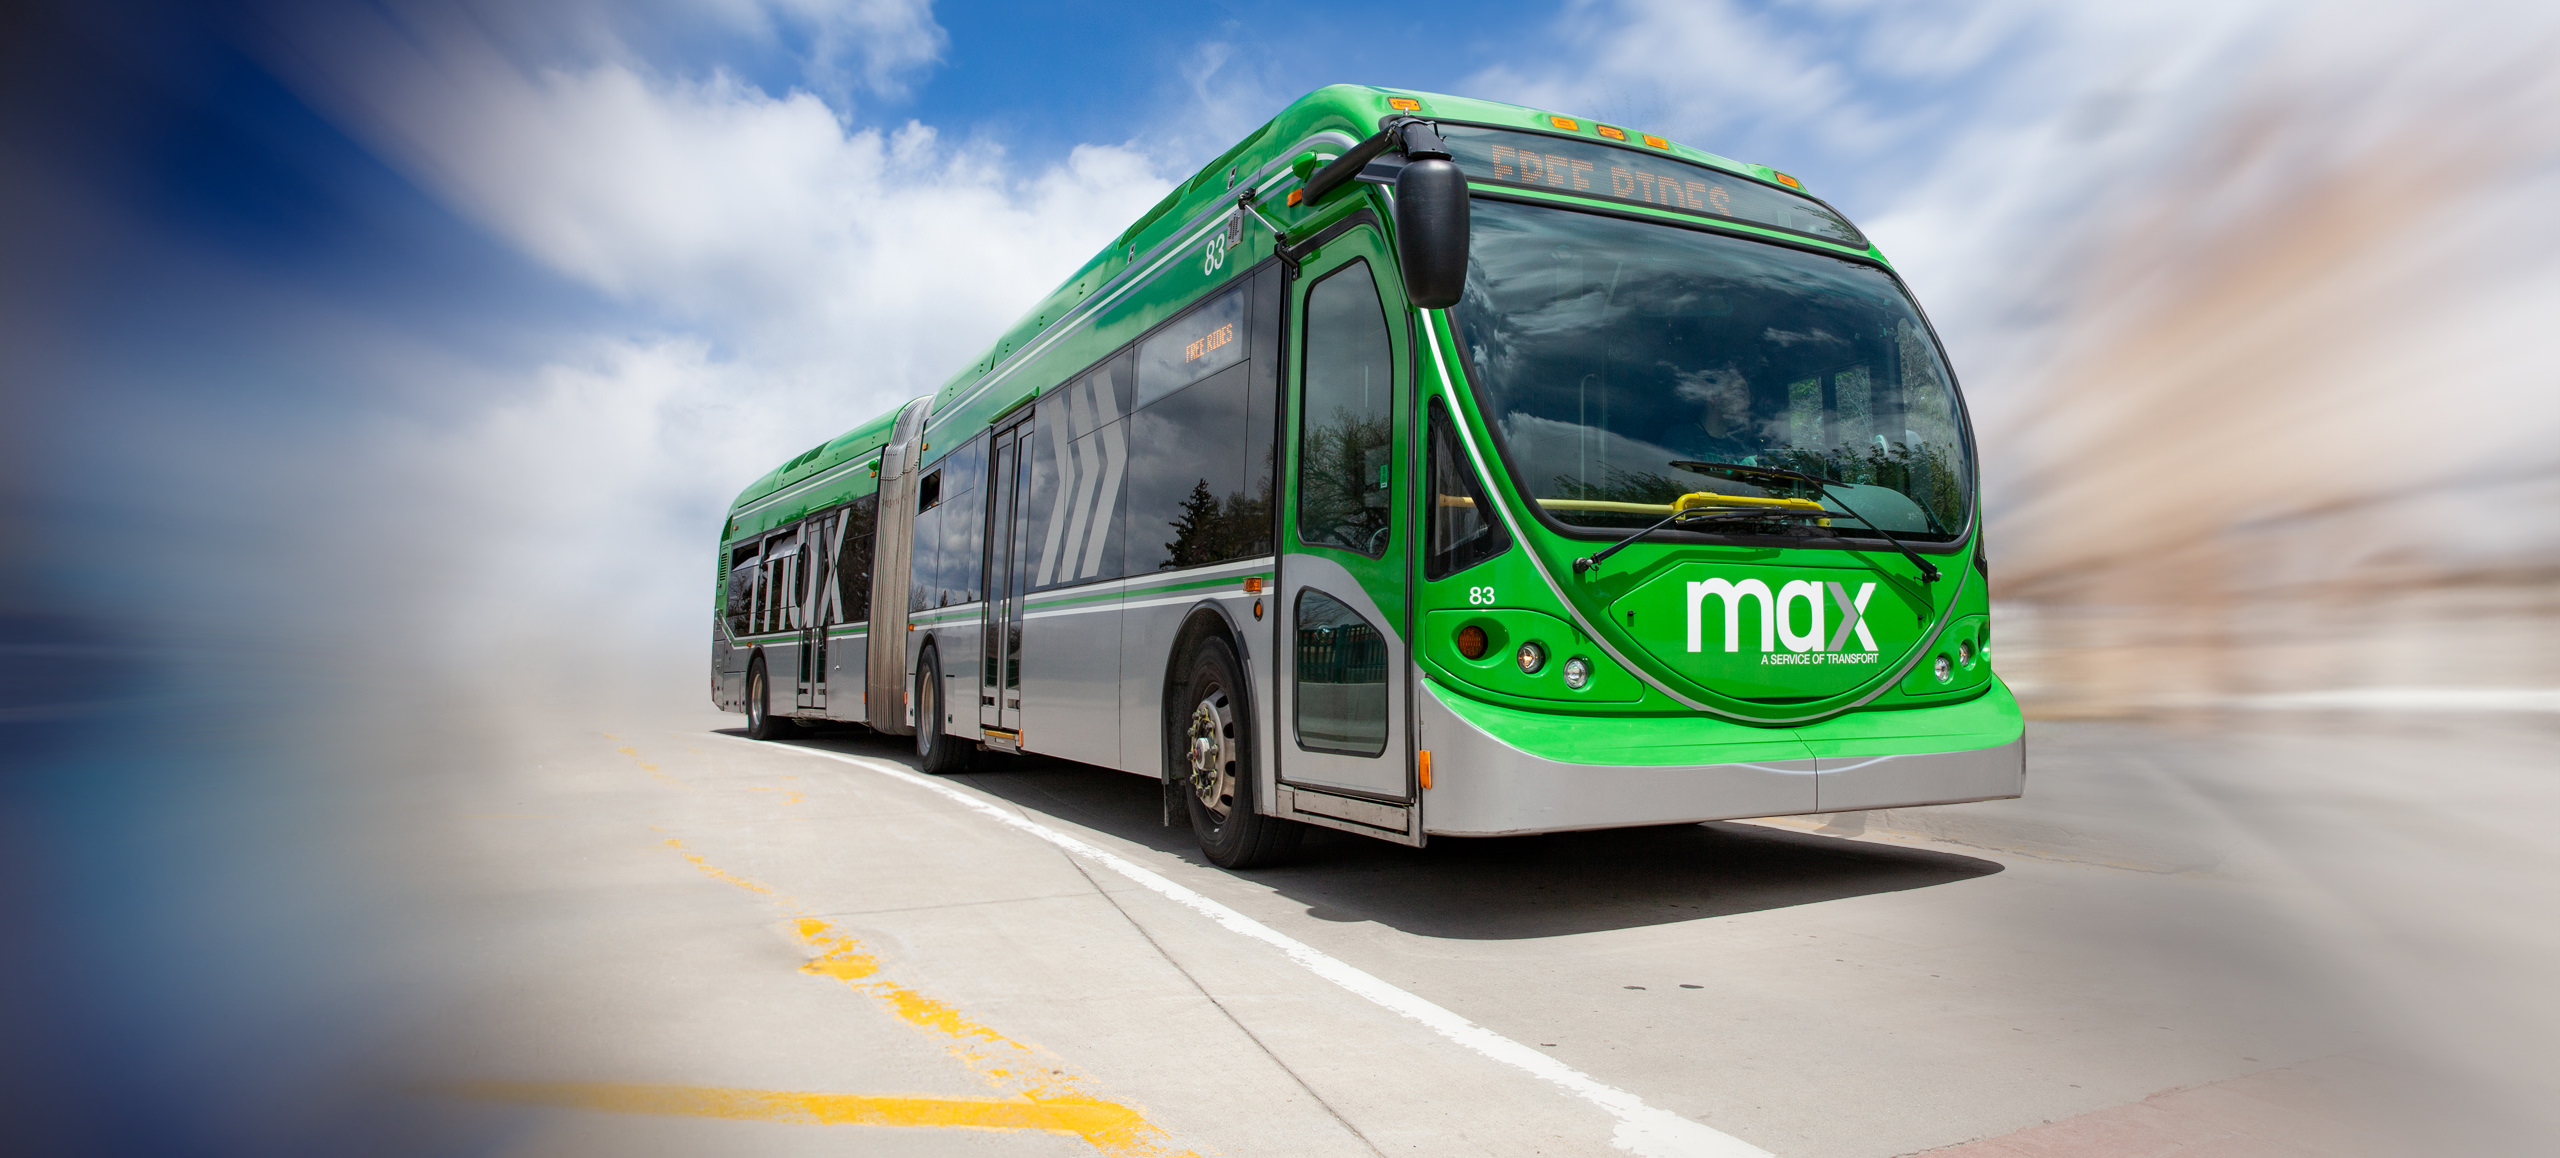 Background image showing green Max articulated bus with blurred background